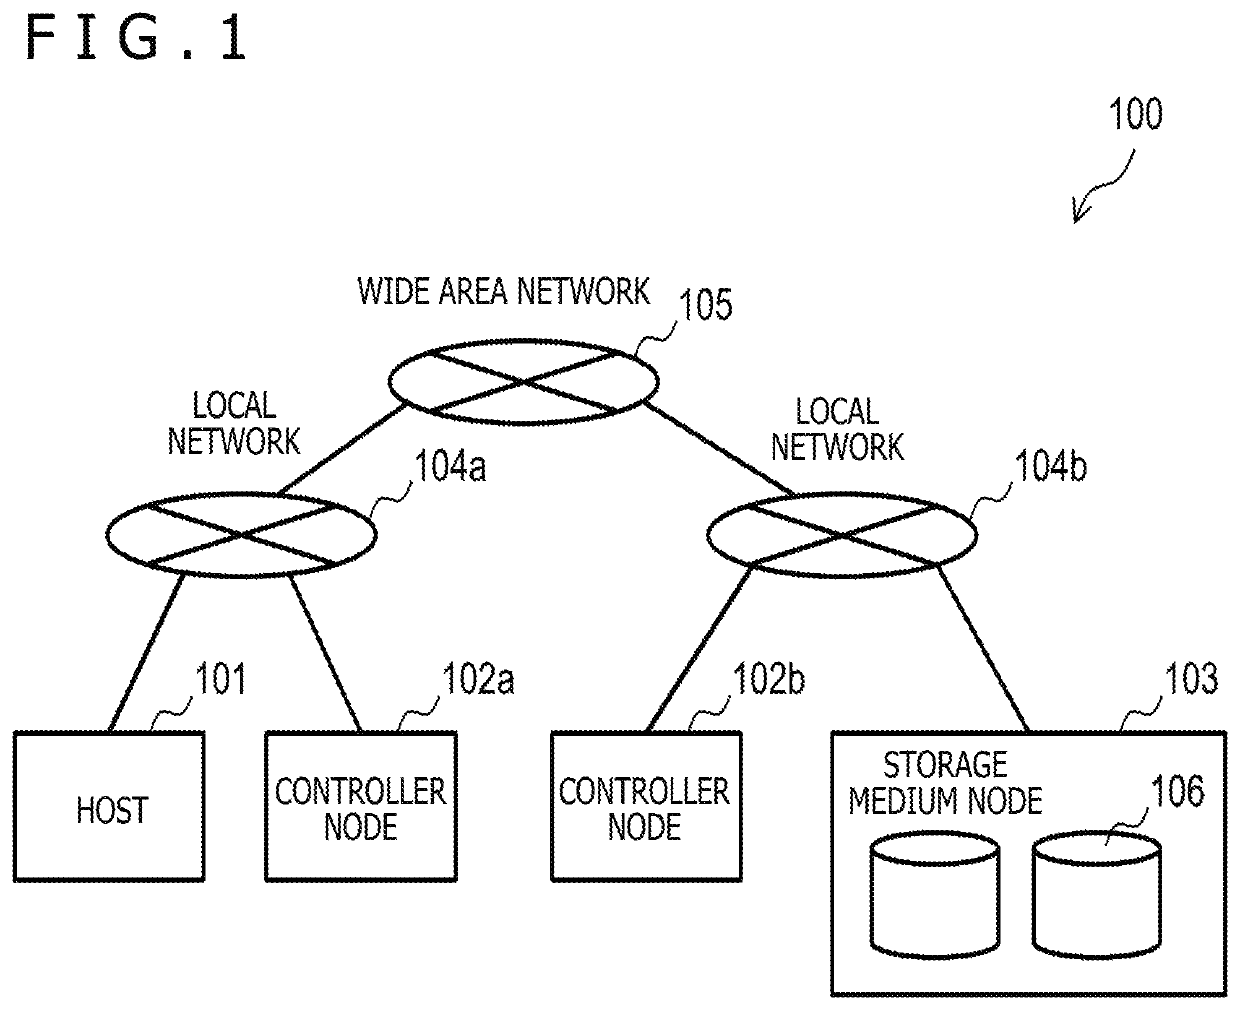 Storage system and controller location method